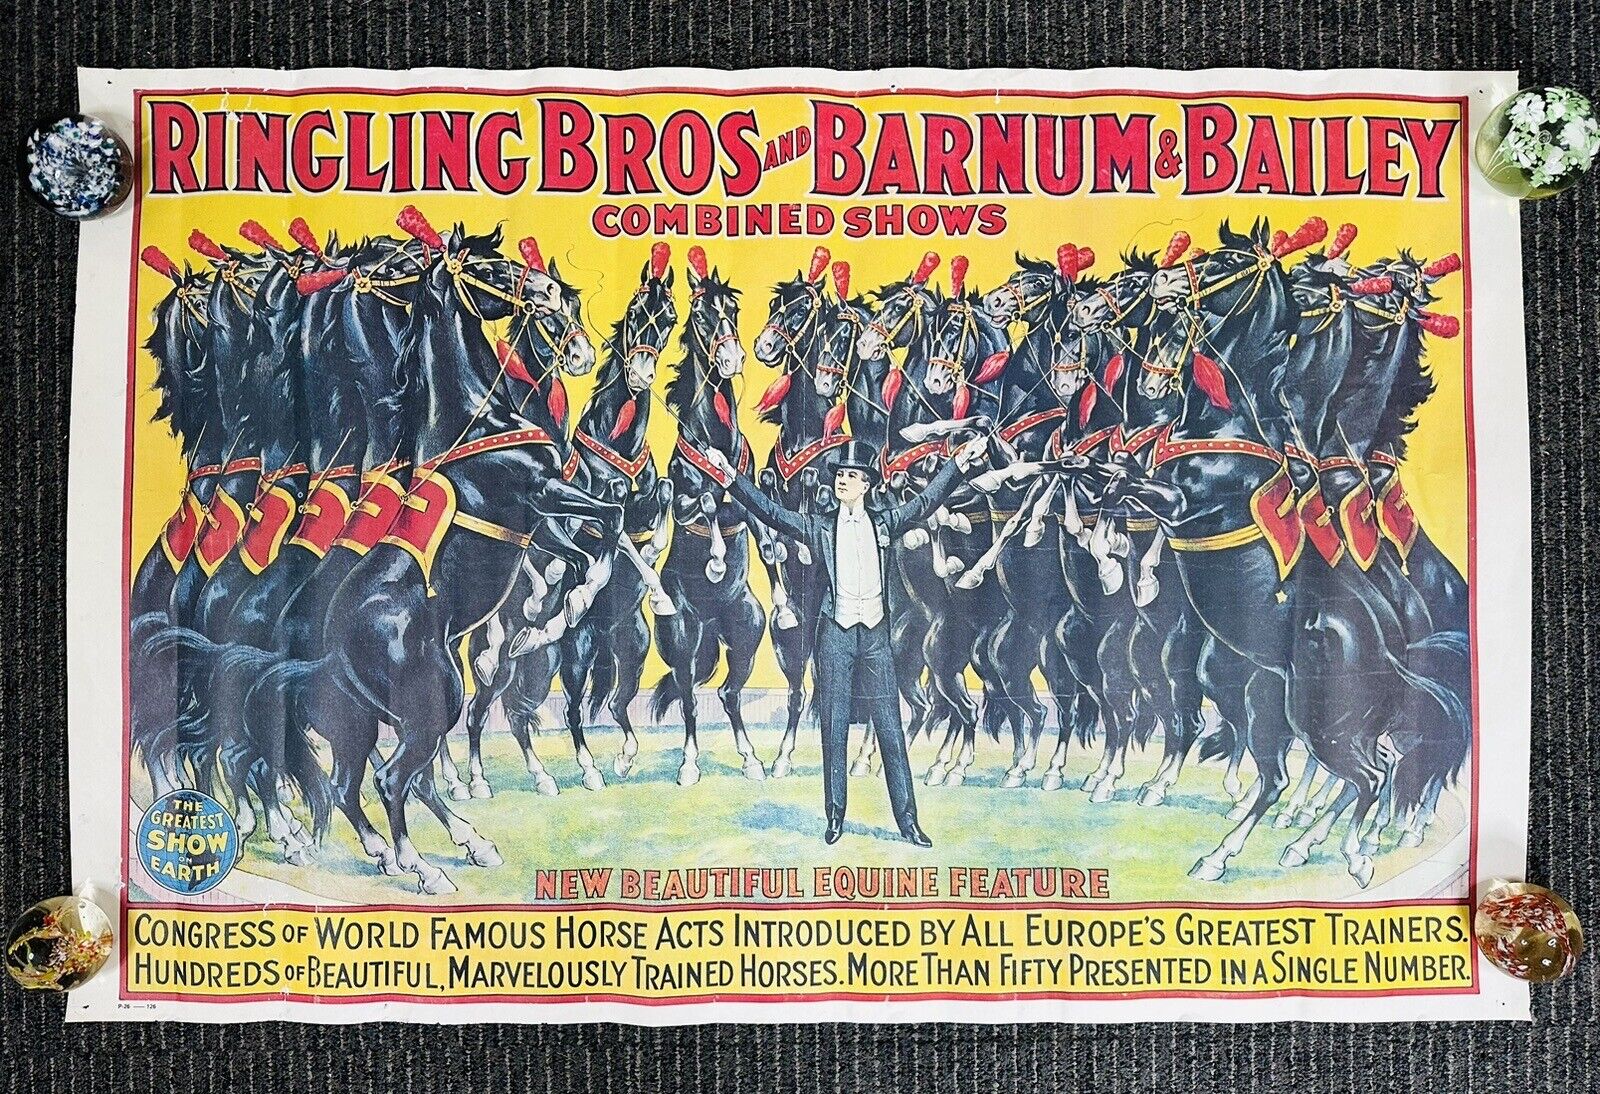 Vintage Ringling Bros and Barnum & Bailey Combined Shows Circus Poster